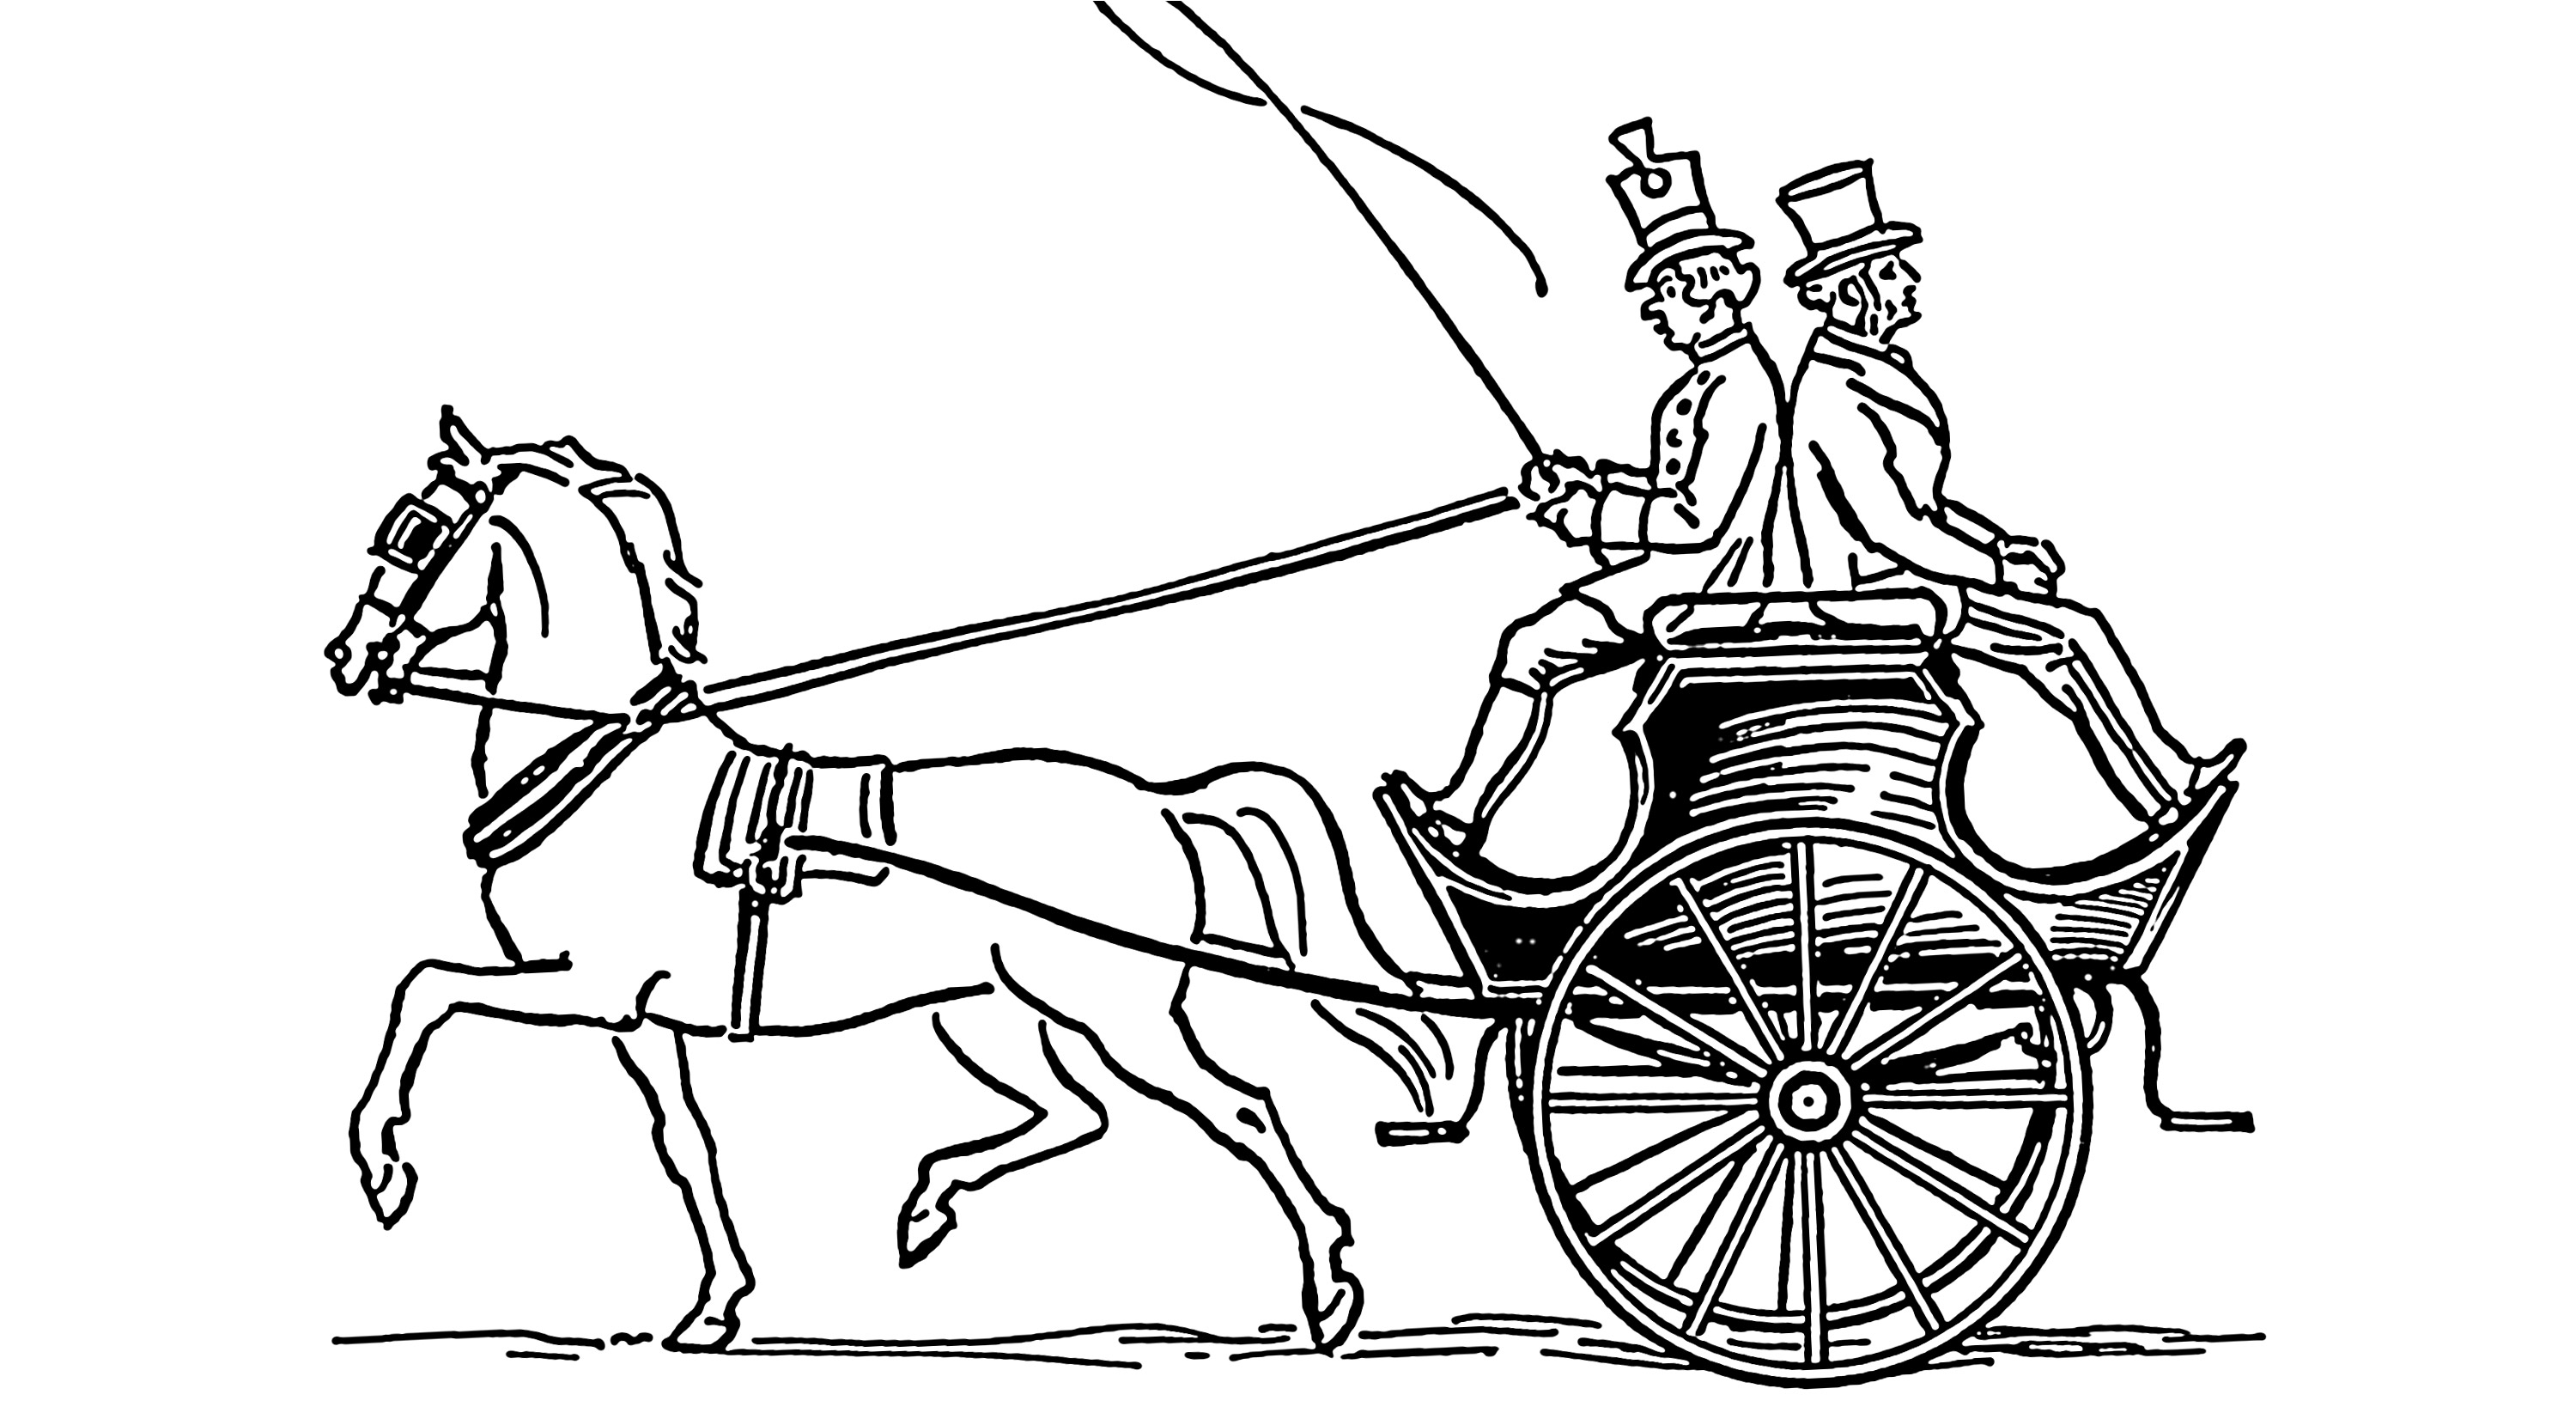 Horses At Work Coloring Pages | The Equinest